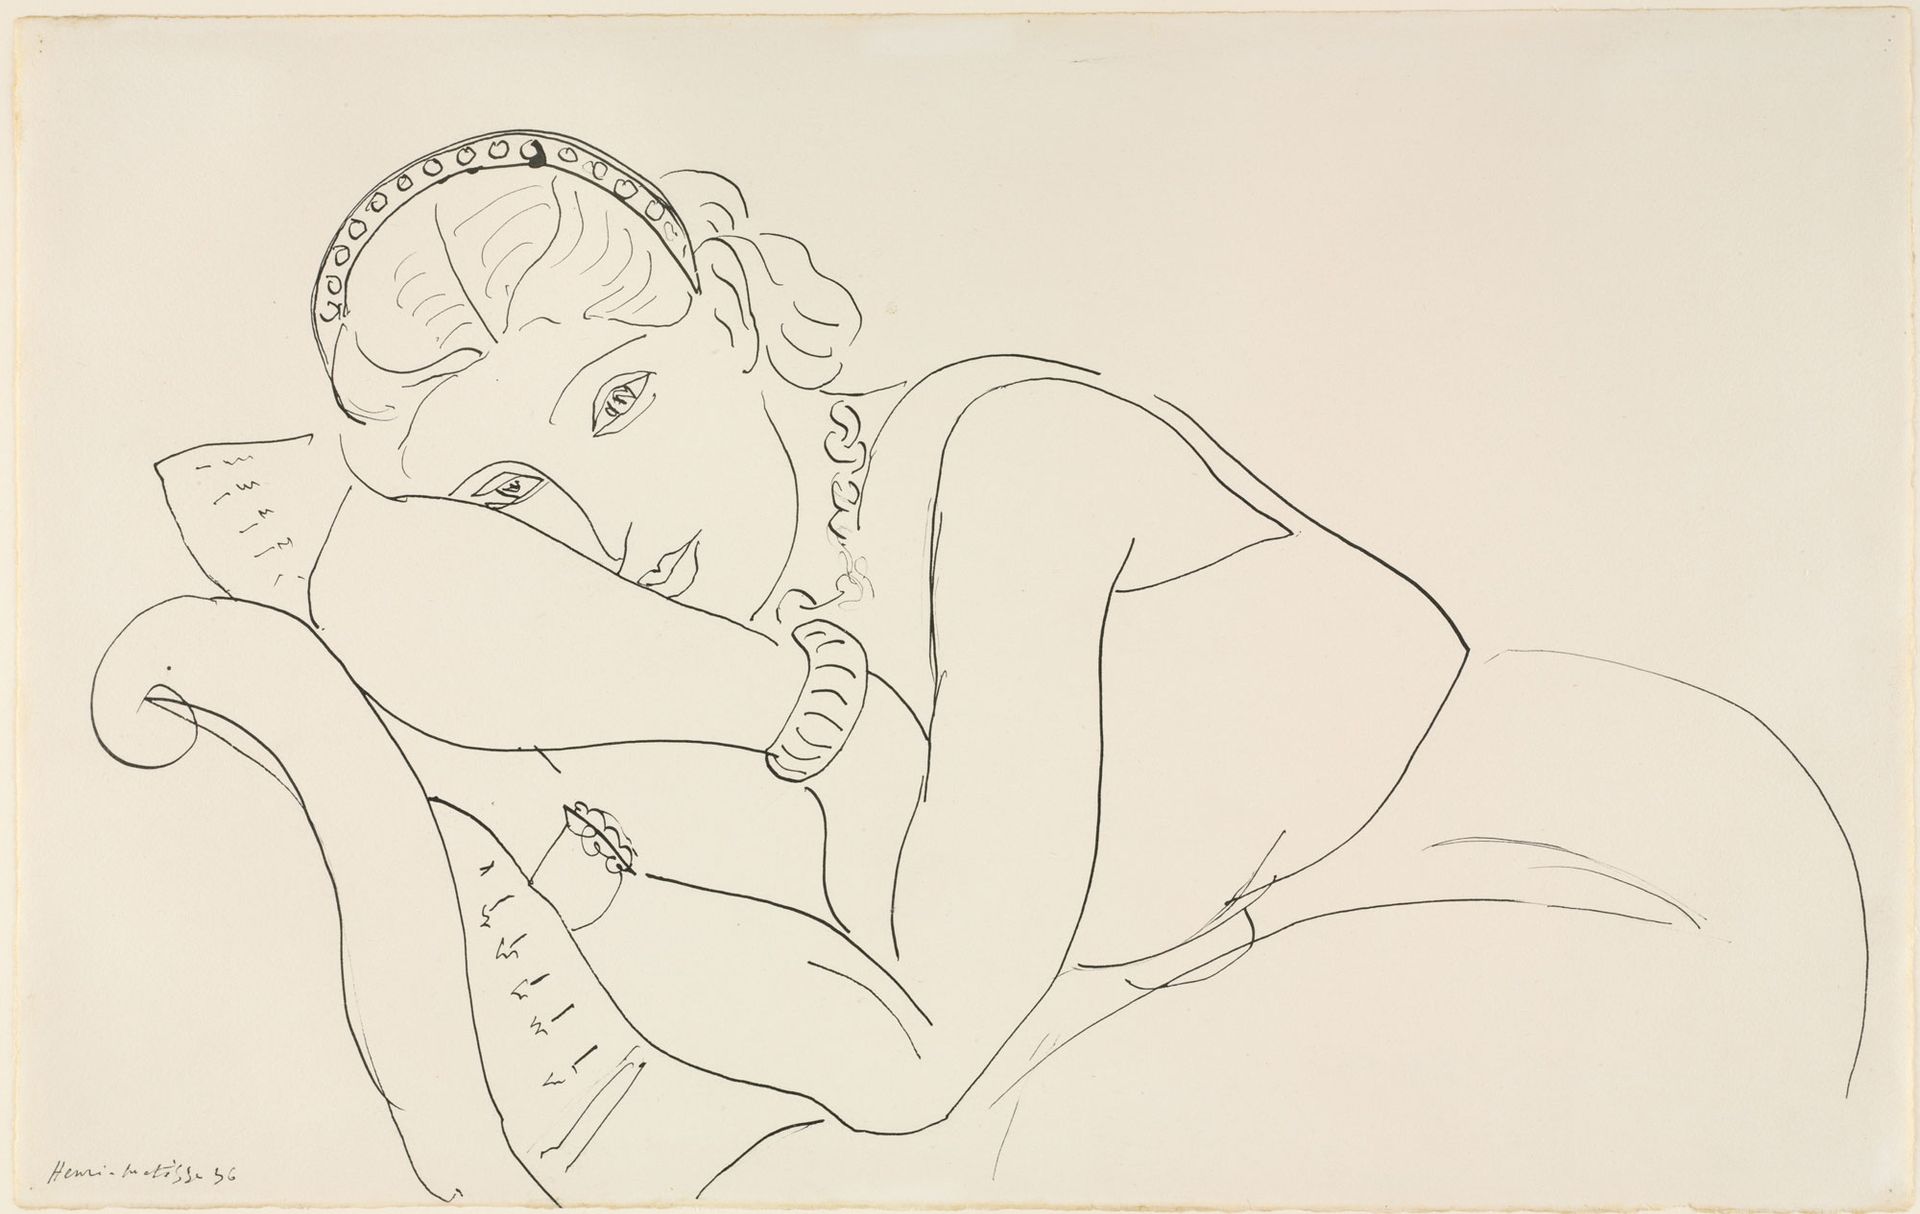 Henri Matisse, Resting Woman Wearing Tiara (1936) is part of the inaugural show of works on paper at the Baltimore Museum of Art's new Ruth R. Marder Center for Matisse Studies  Photo: Mitro Hood; courtesy of the Baltimore Museum of Art; © 2021 Succession H. Matisse/Artists Rights Society (ARS), New York

